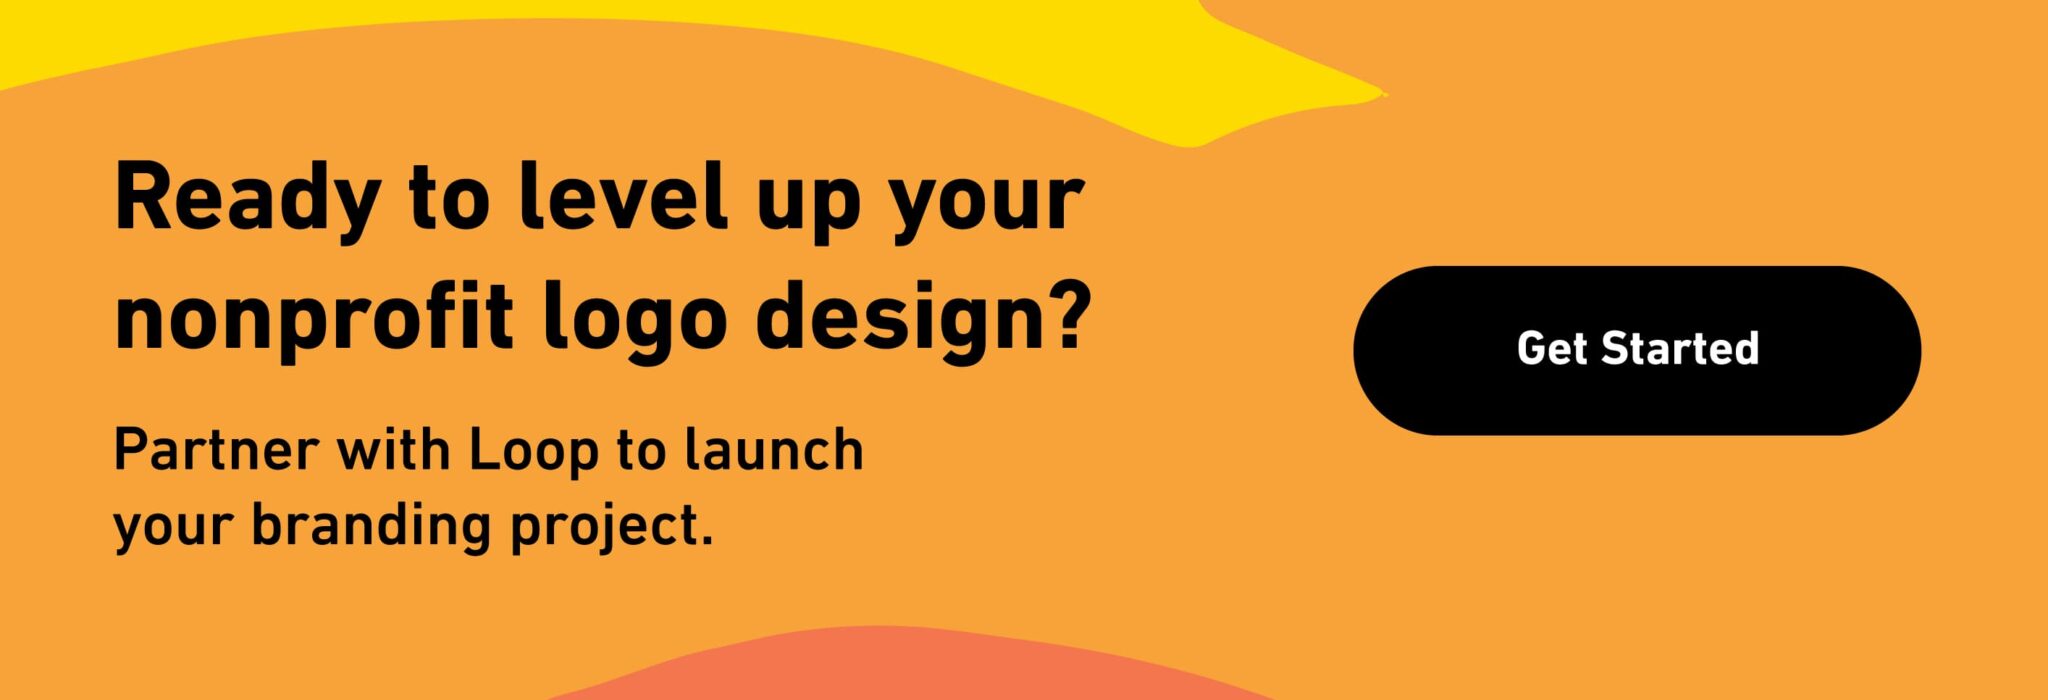 Ready to level up your nonprofit logo design? Partner with Loop to launch your branding project. Get Started.